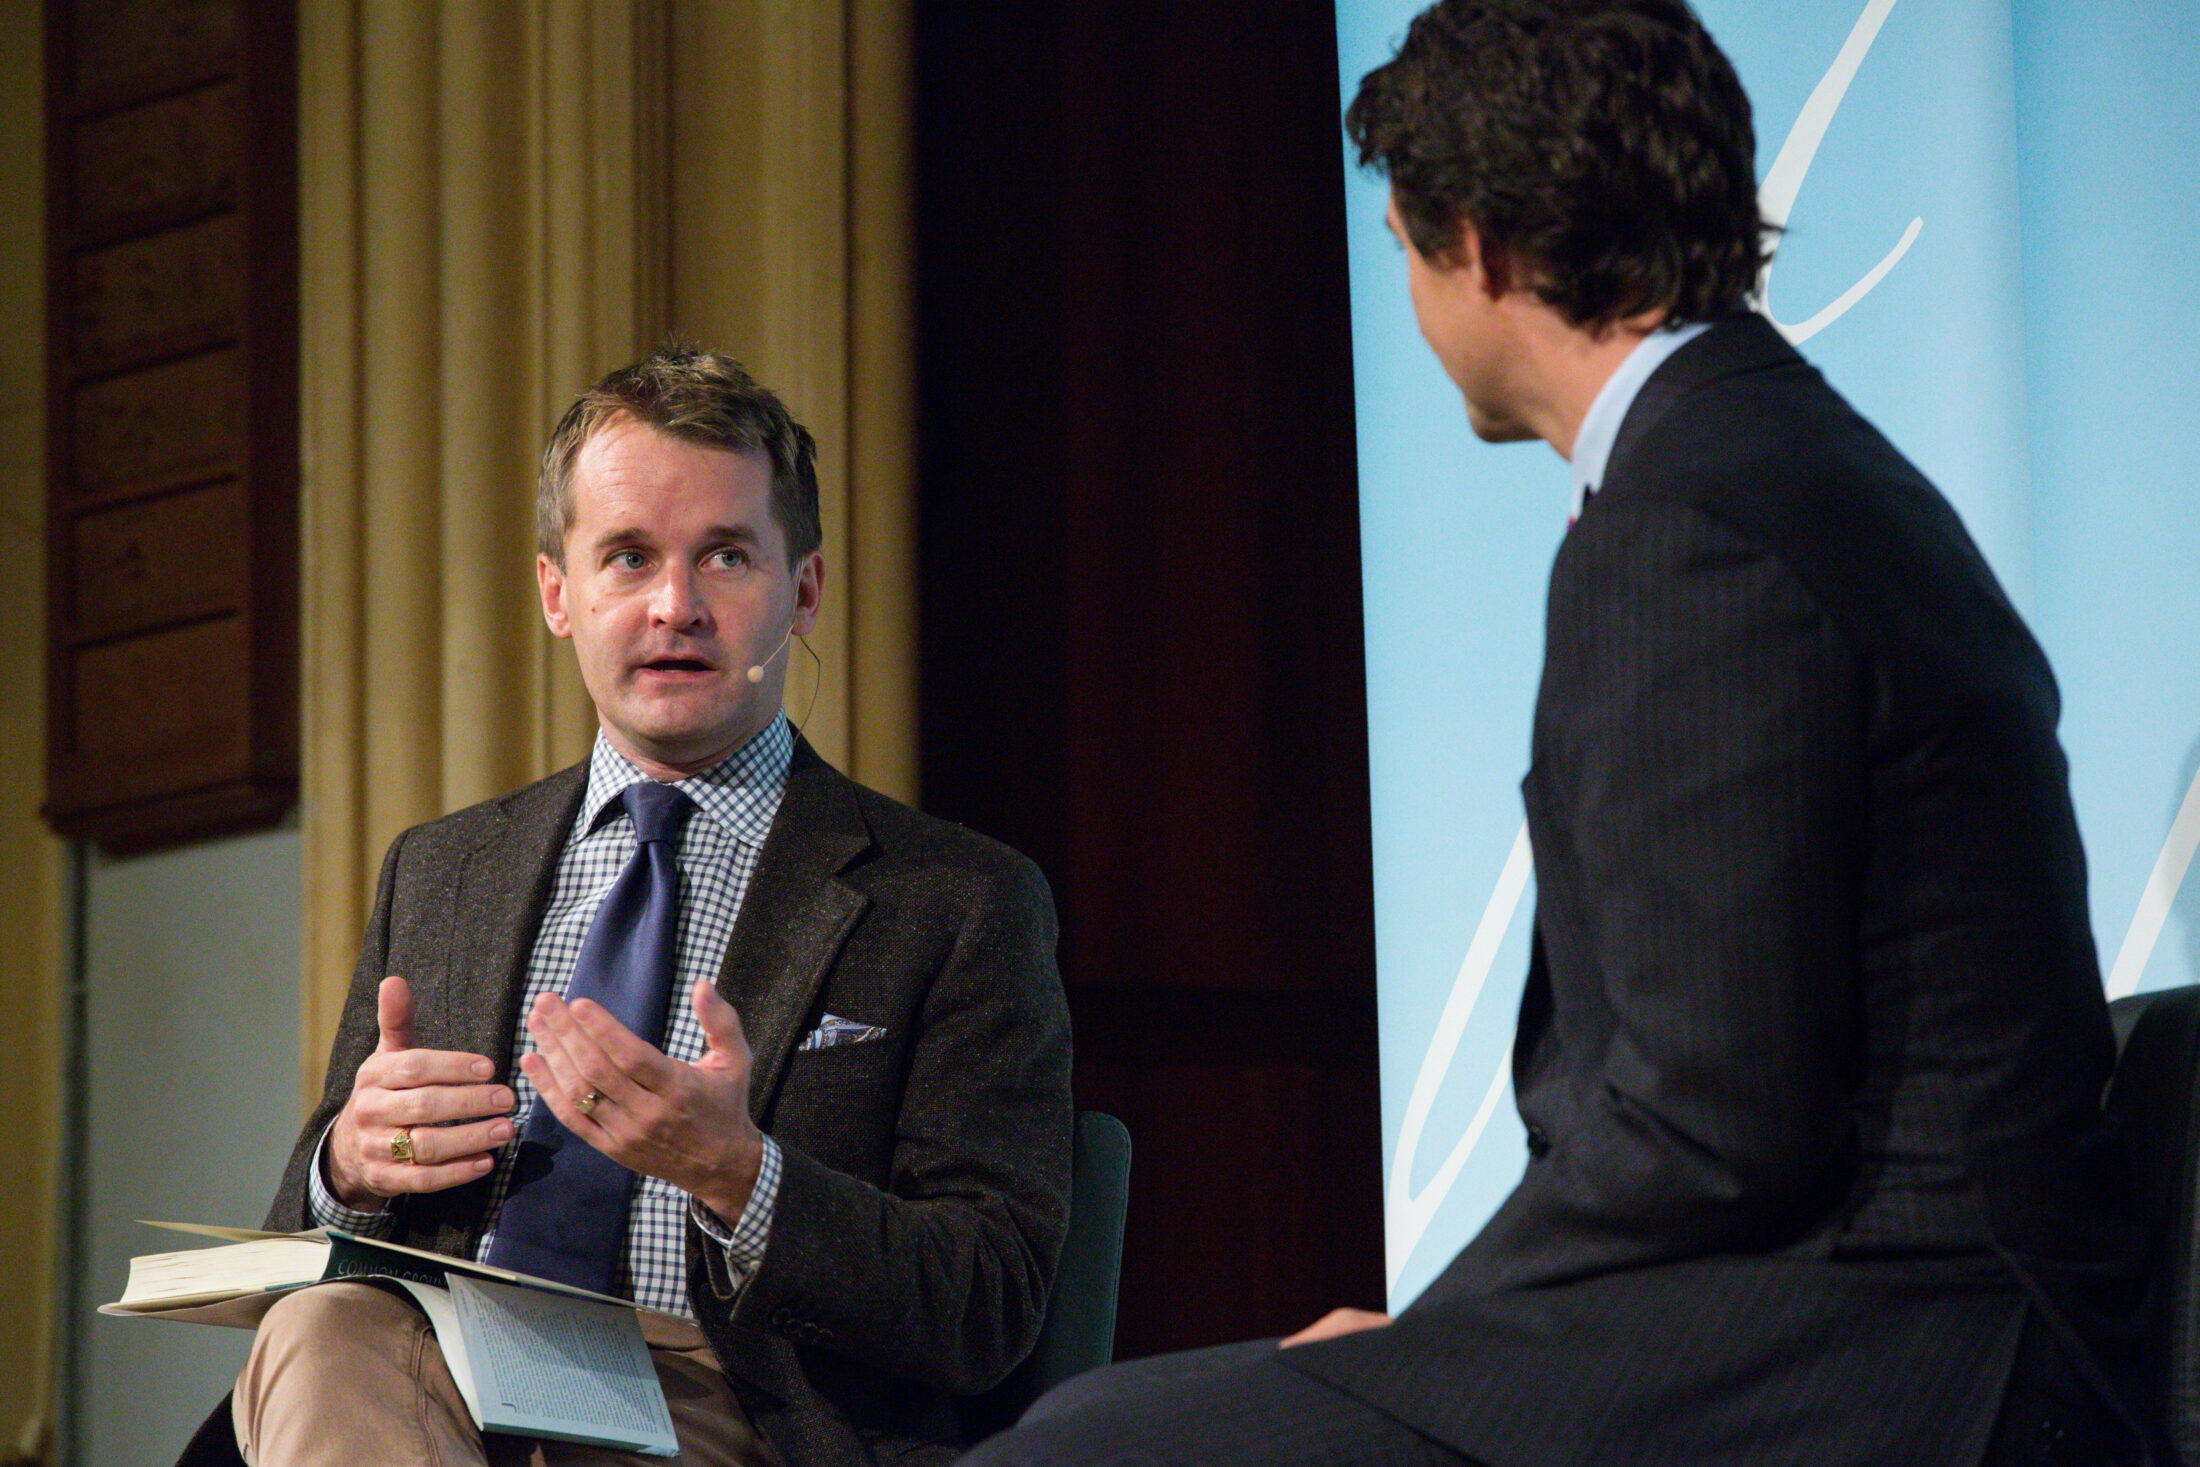 Seamus O'Regan speaking on a stage with Justin Trudeau